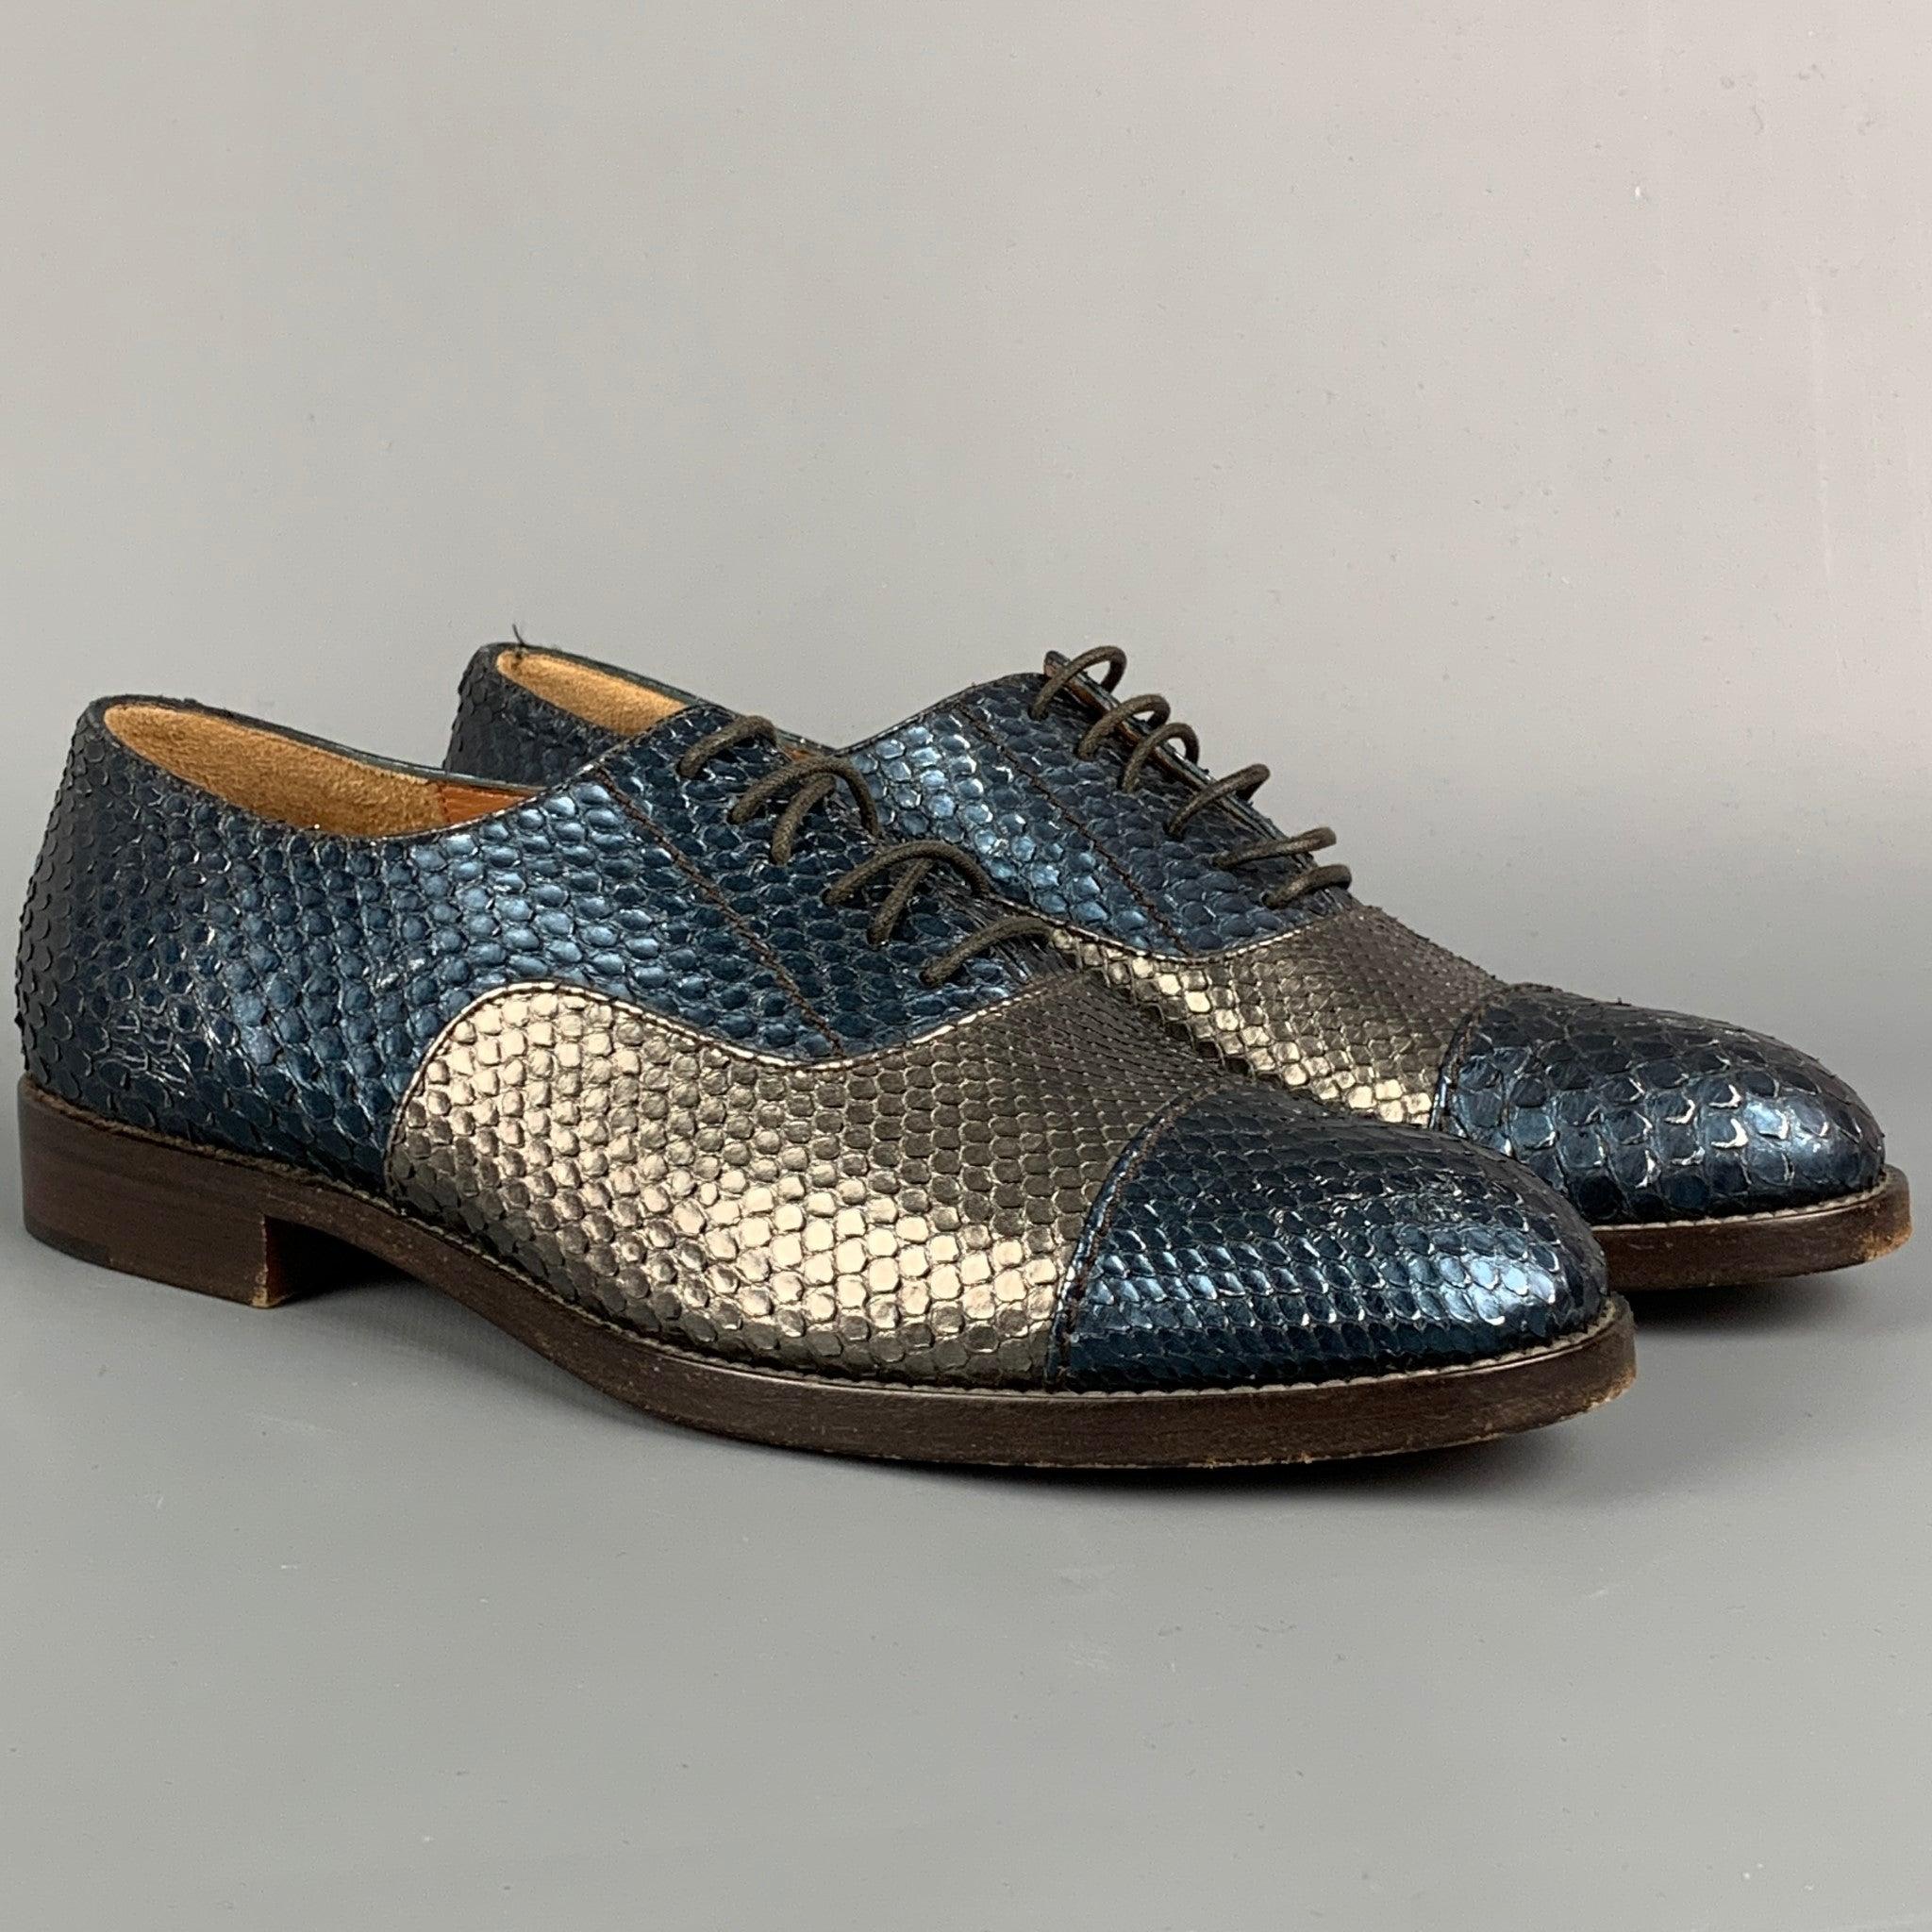 MARC by MARC JACOBS shoes comes in a blue & silver metallic snake skin leather featuring a cap toe and a lace up closure. Made in Italy.
Very Good
Pre-Owned Condition. 

Marked:   39 Outsole: 11 inches  x 3.5 inches 
  
  
 
Reference: